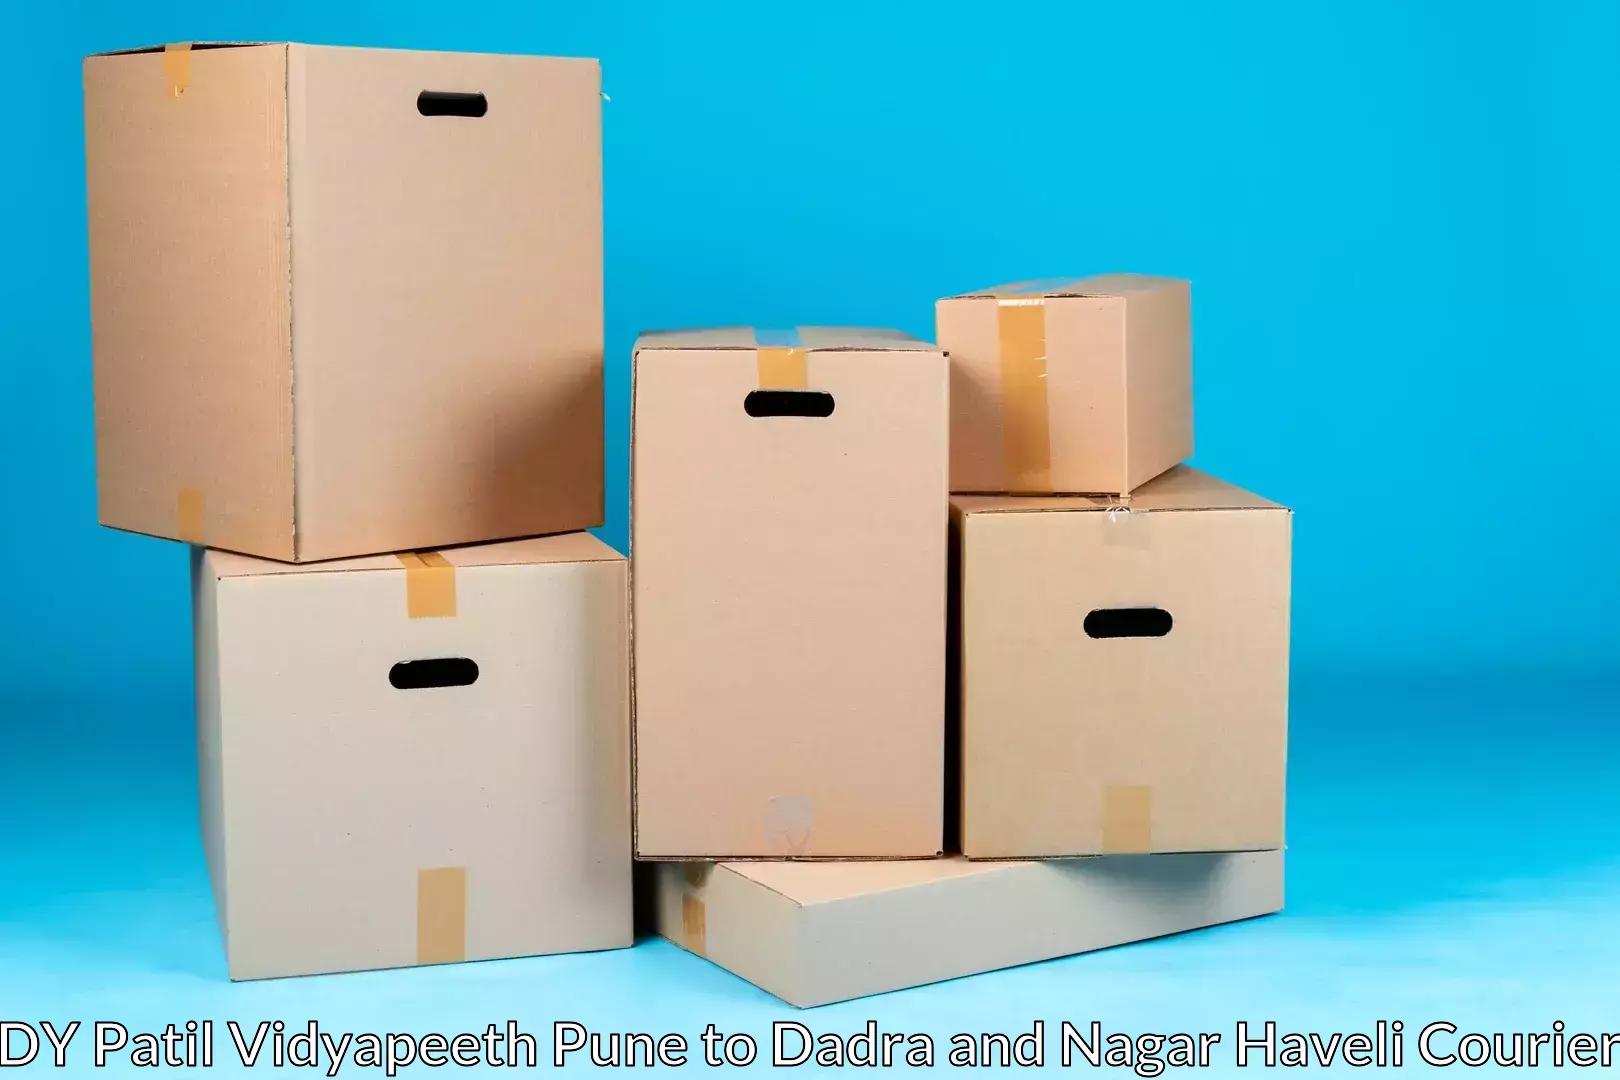 Cost-effective moving solutions DY Patil Vidyapeeth Pune to Silvassa